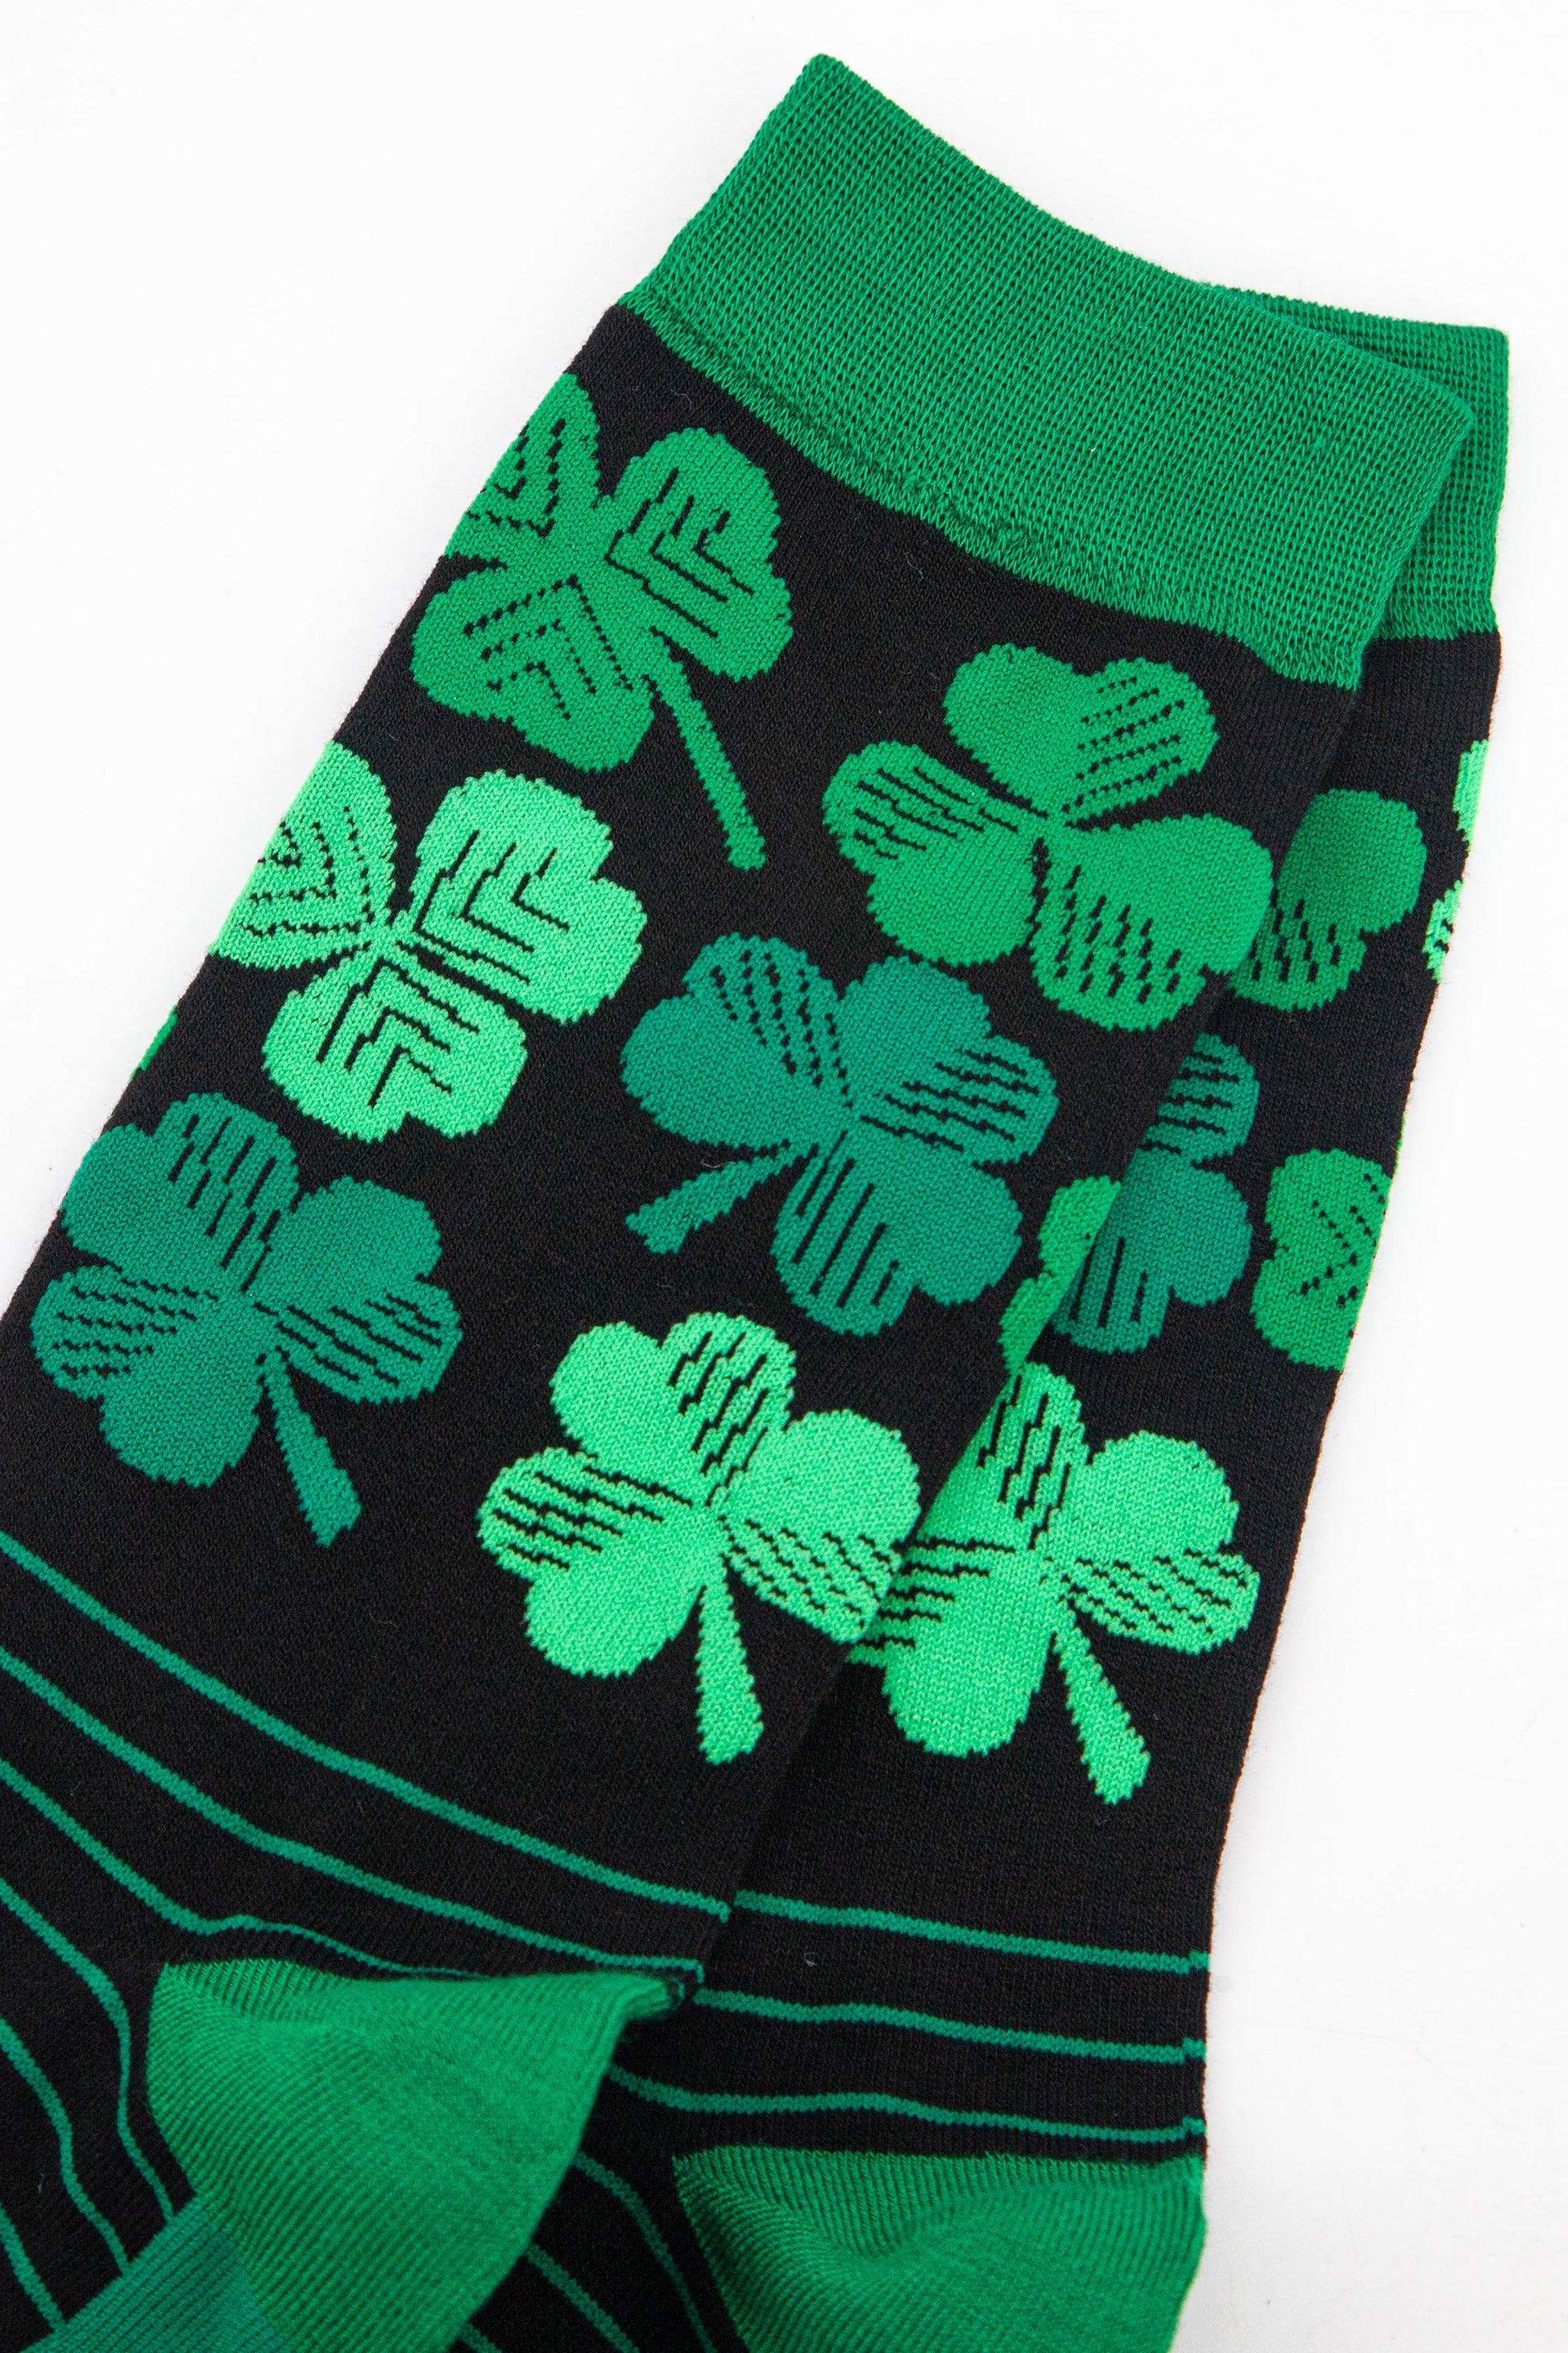 close up of the green Irish shamrock pattern on the ankle of the socks